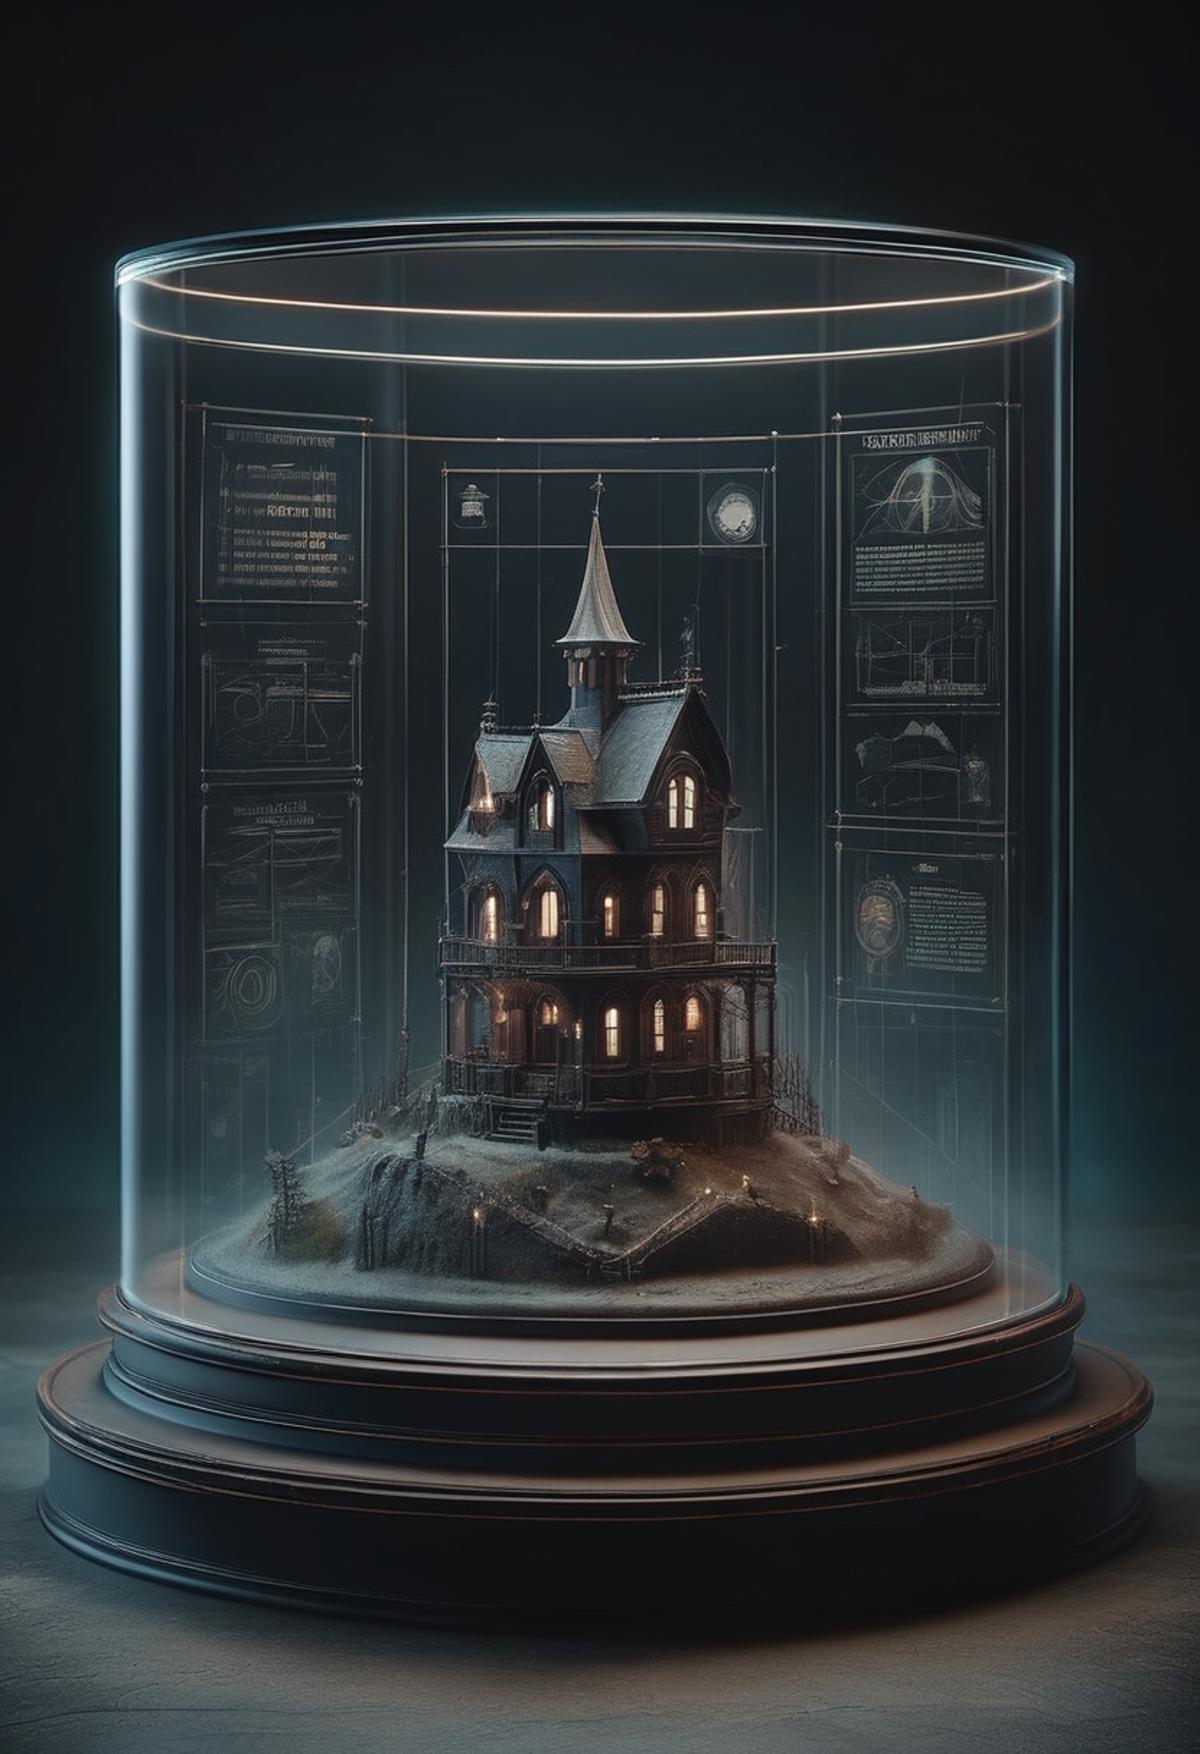 A 3D model of a large house with a steeple is displayed in a glass case.